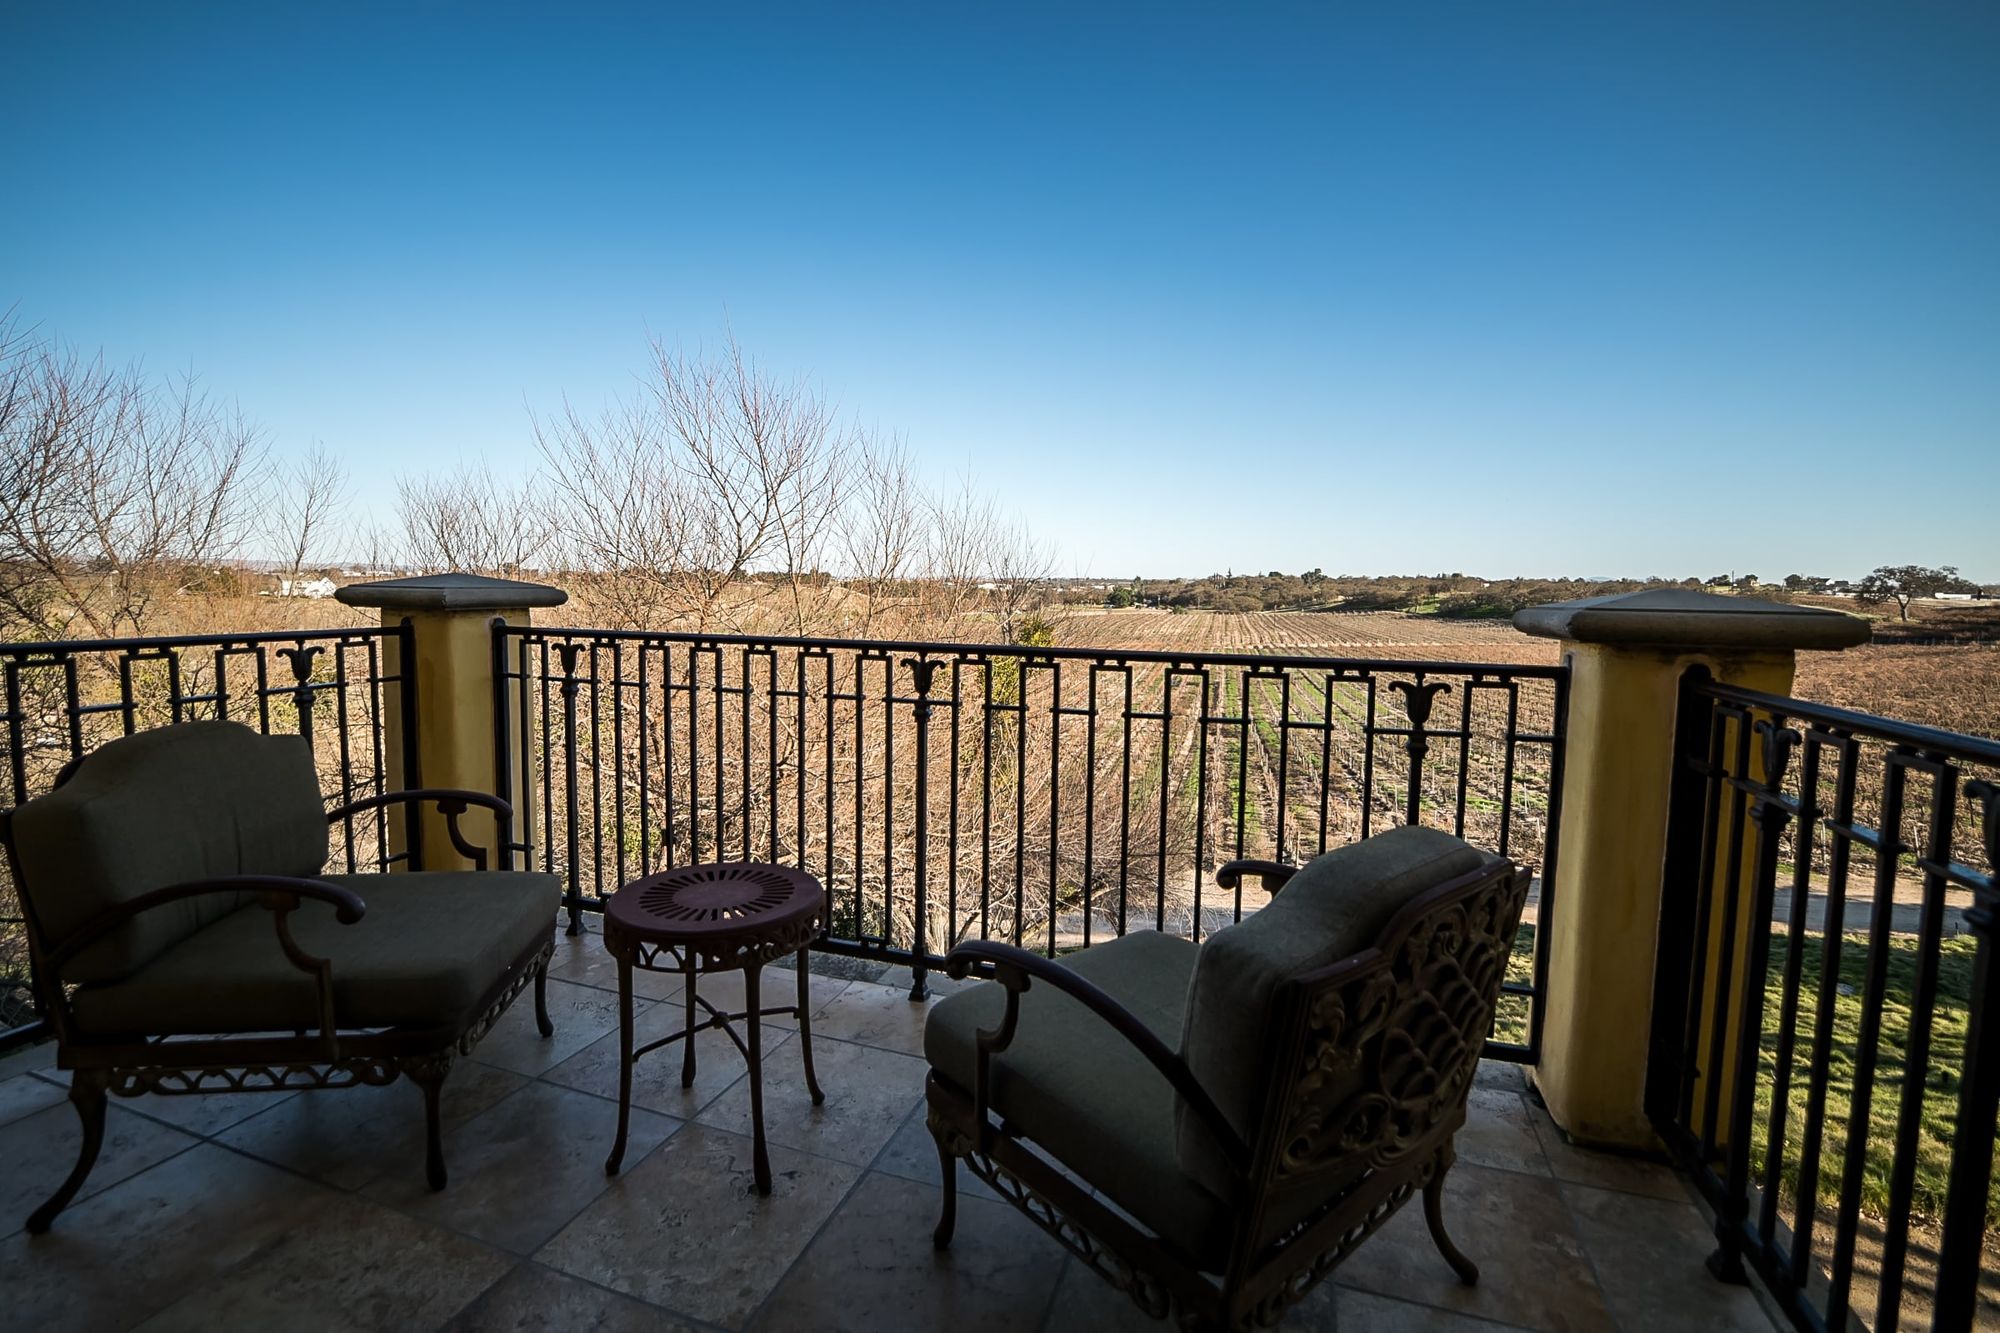 Patio with seating for two and view of the vineyard beyond